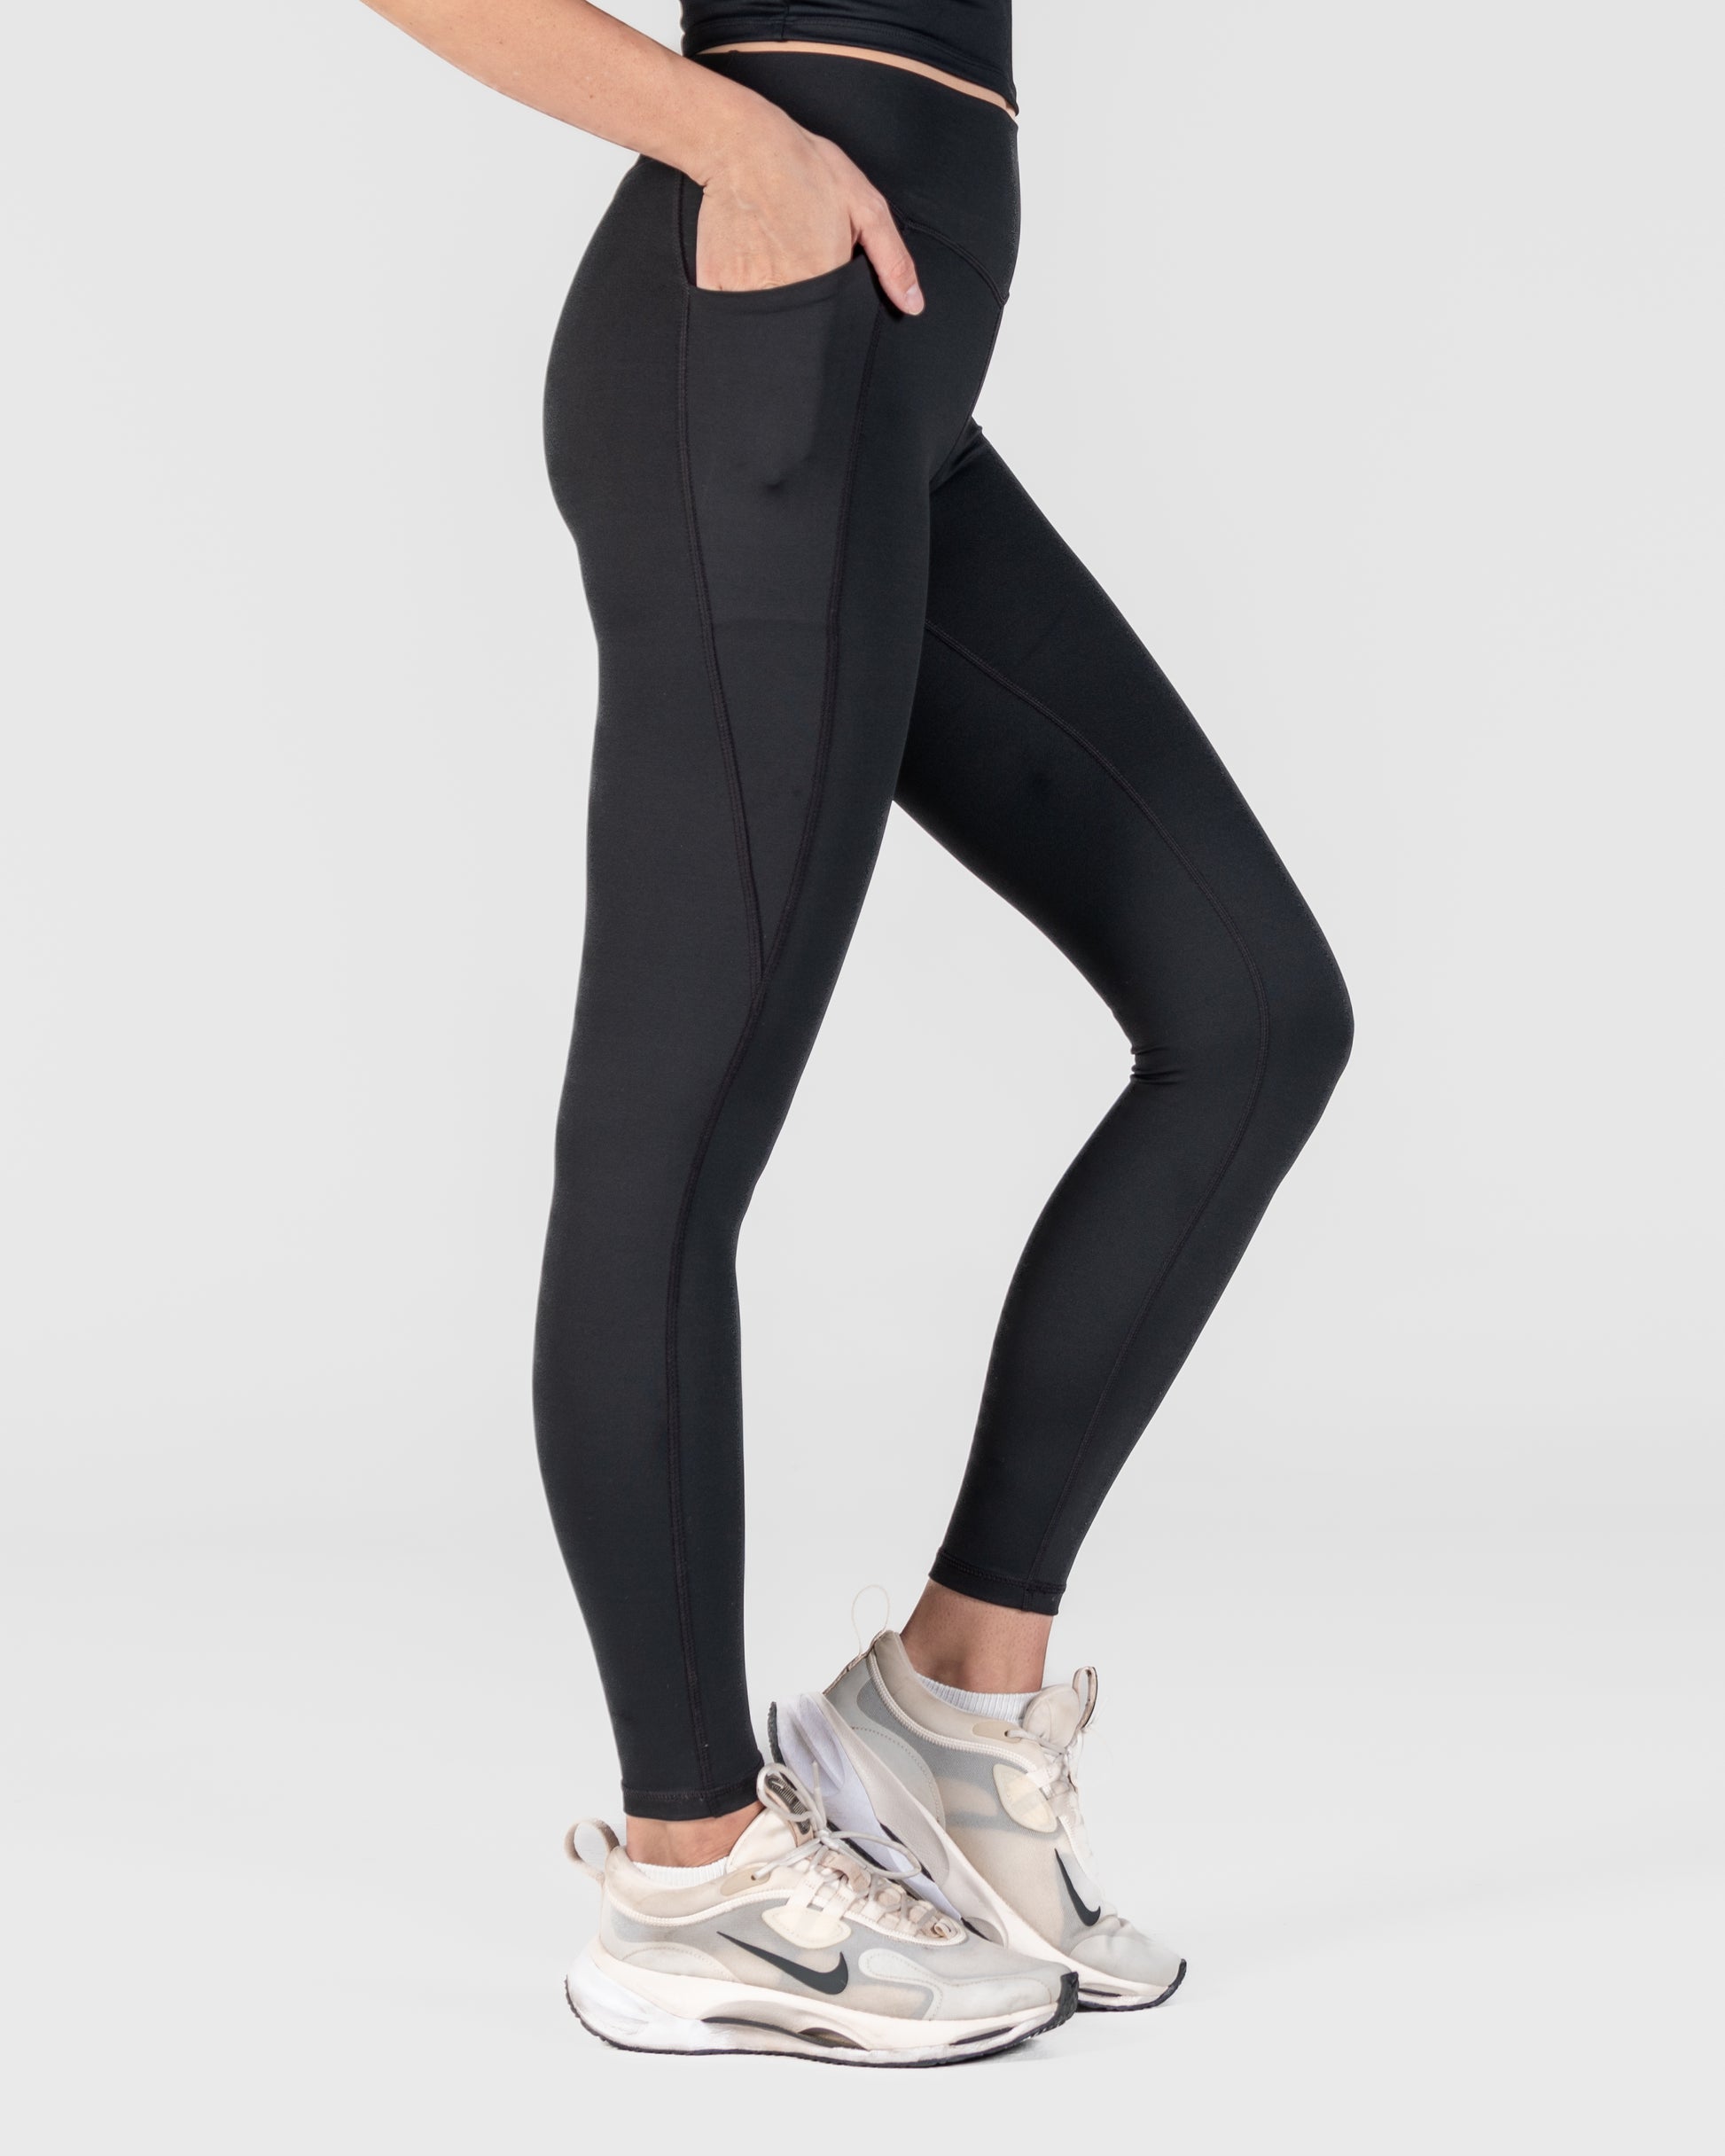 Wholesale Navy Contour Seam High Waisted Sport Capris with Pockets